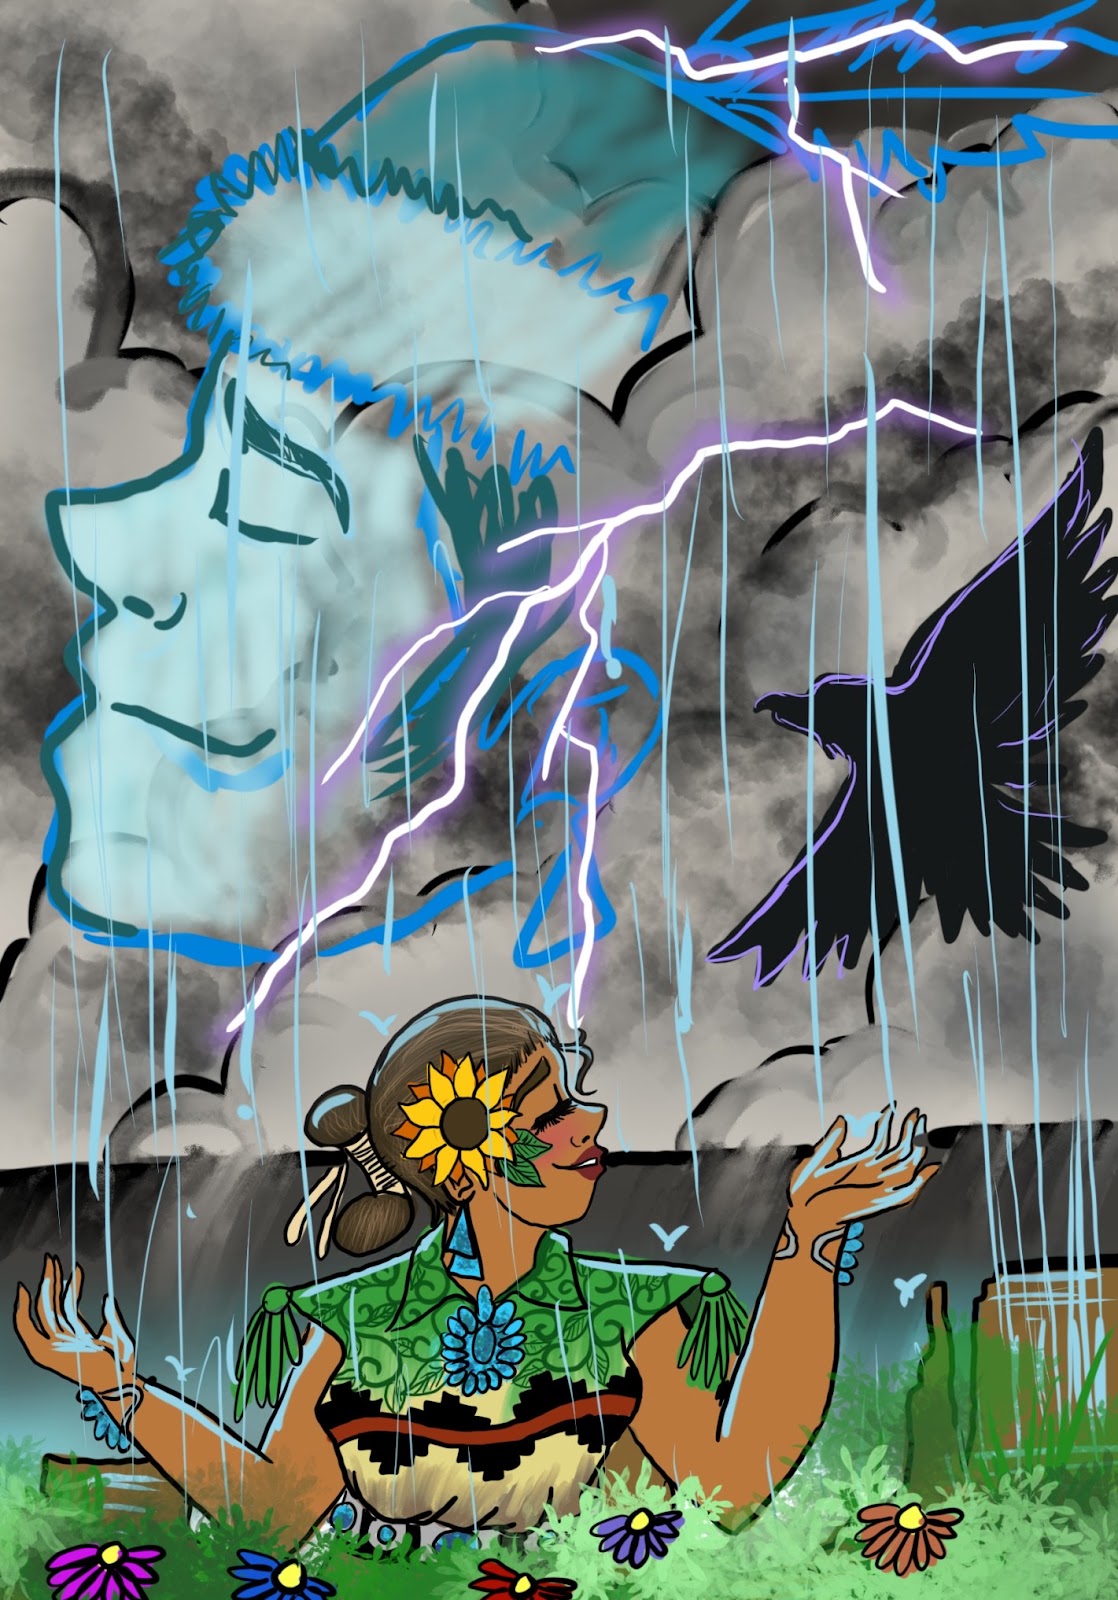 A image from Clarene's graphic novel that connects air quality to Navajo culture